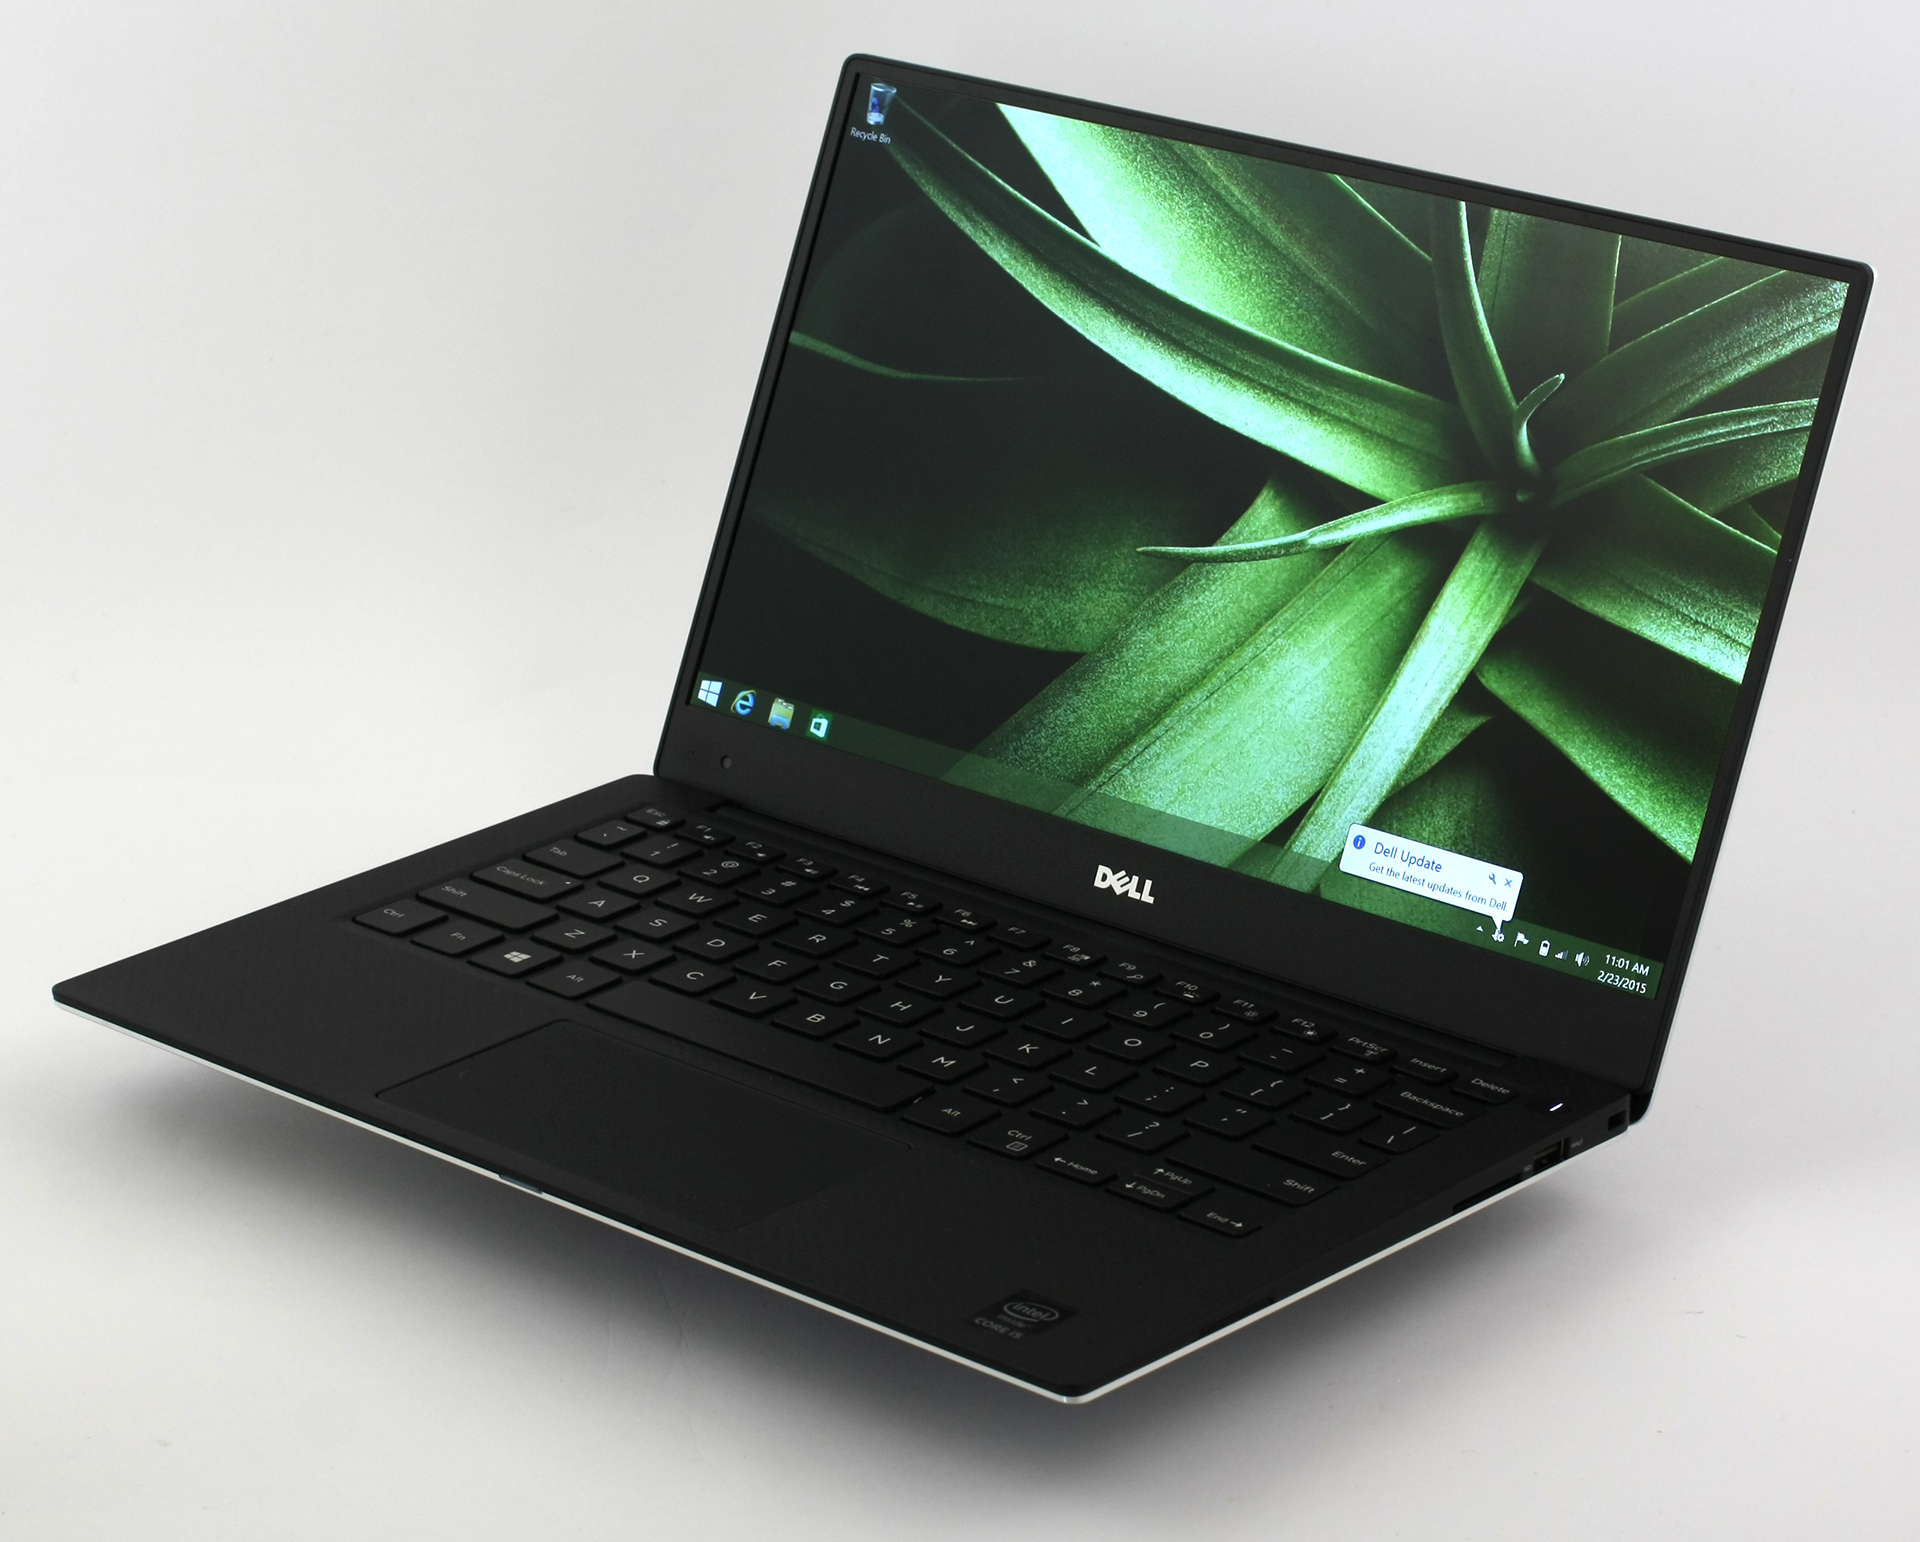 Dell XPS 13 9343 - Specs, Tests, and Prices | LaptopMedia Canada